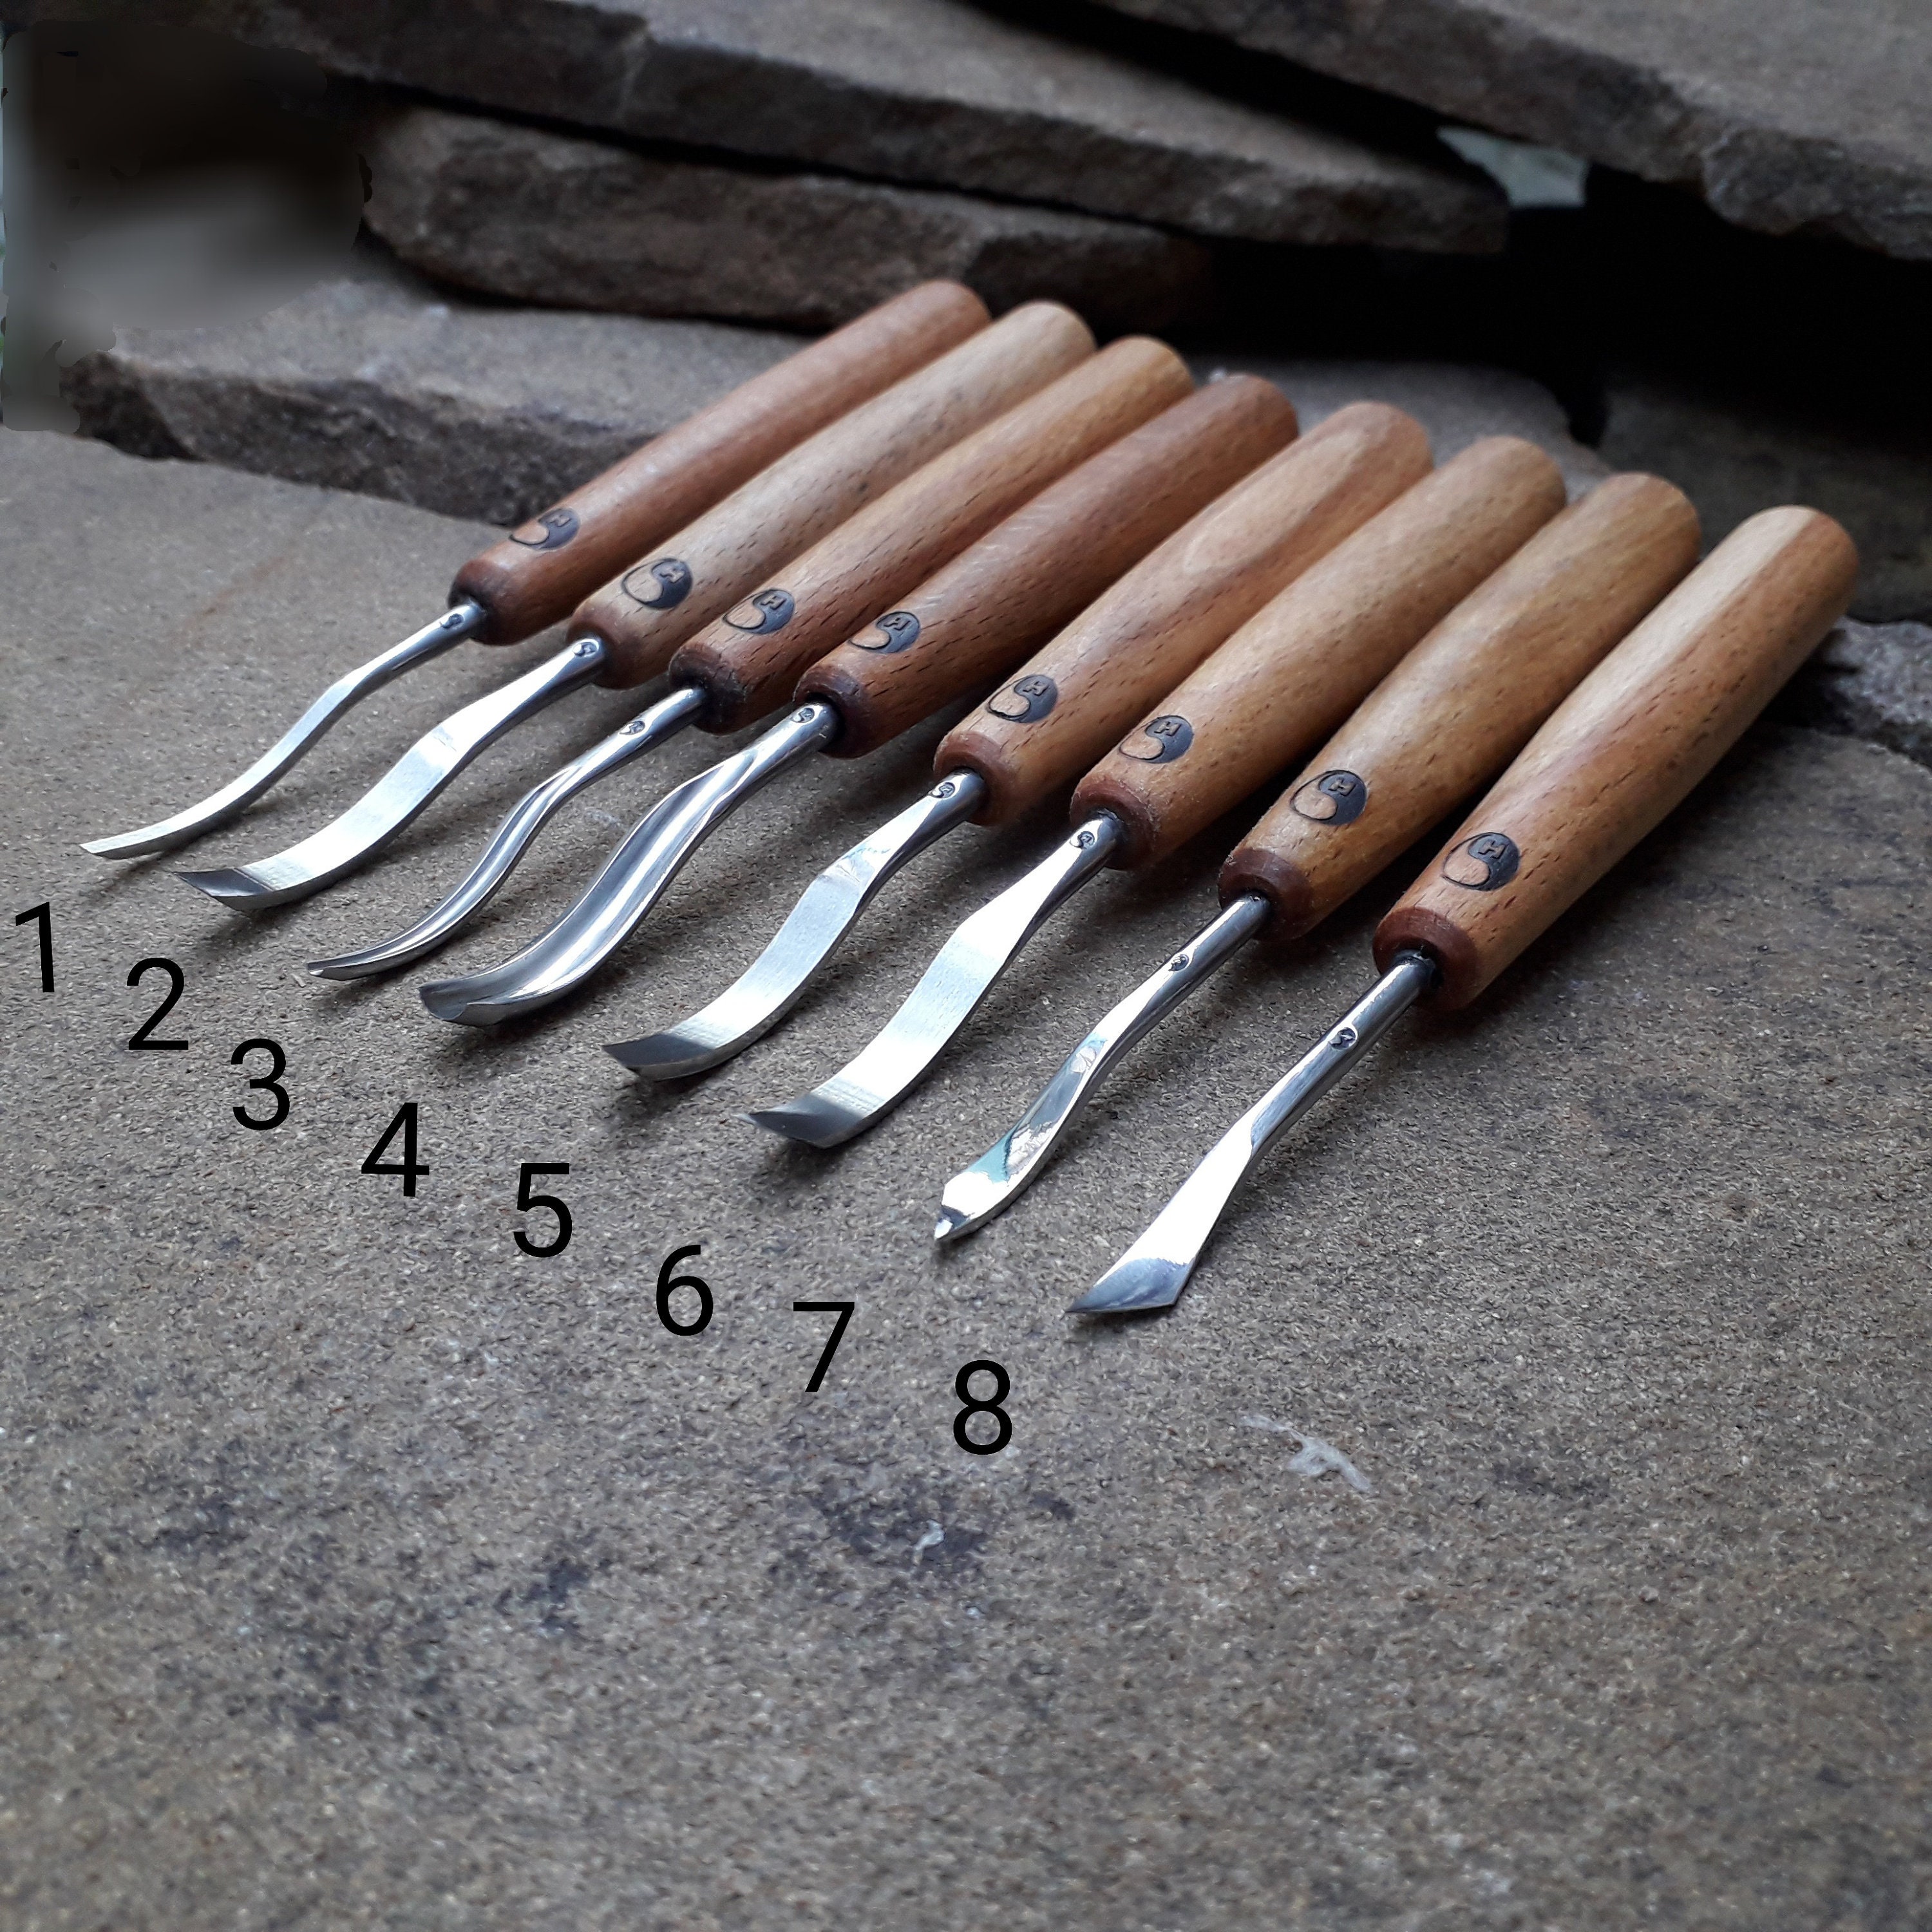 Forged Mini Chisels. Chisels for Wood Carving. the Chisels Are Curved. 